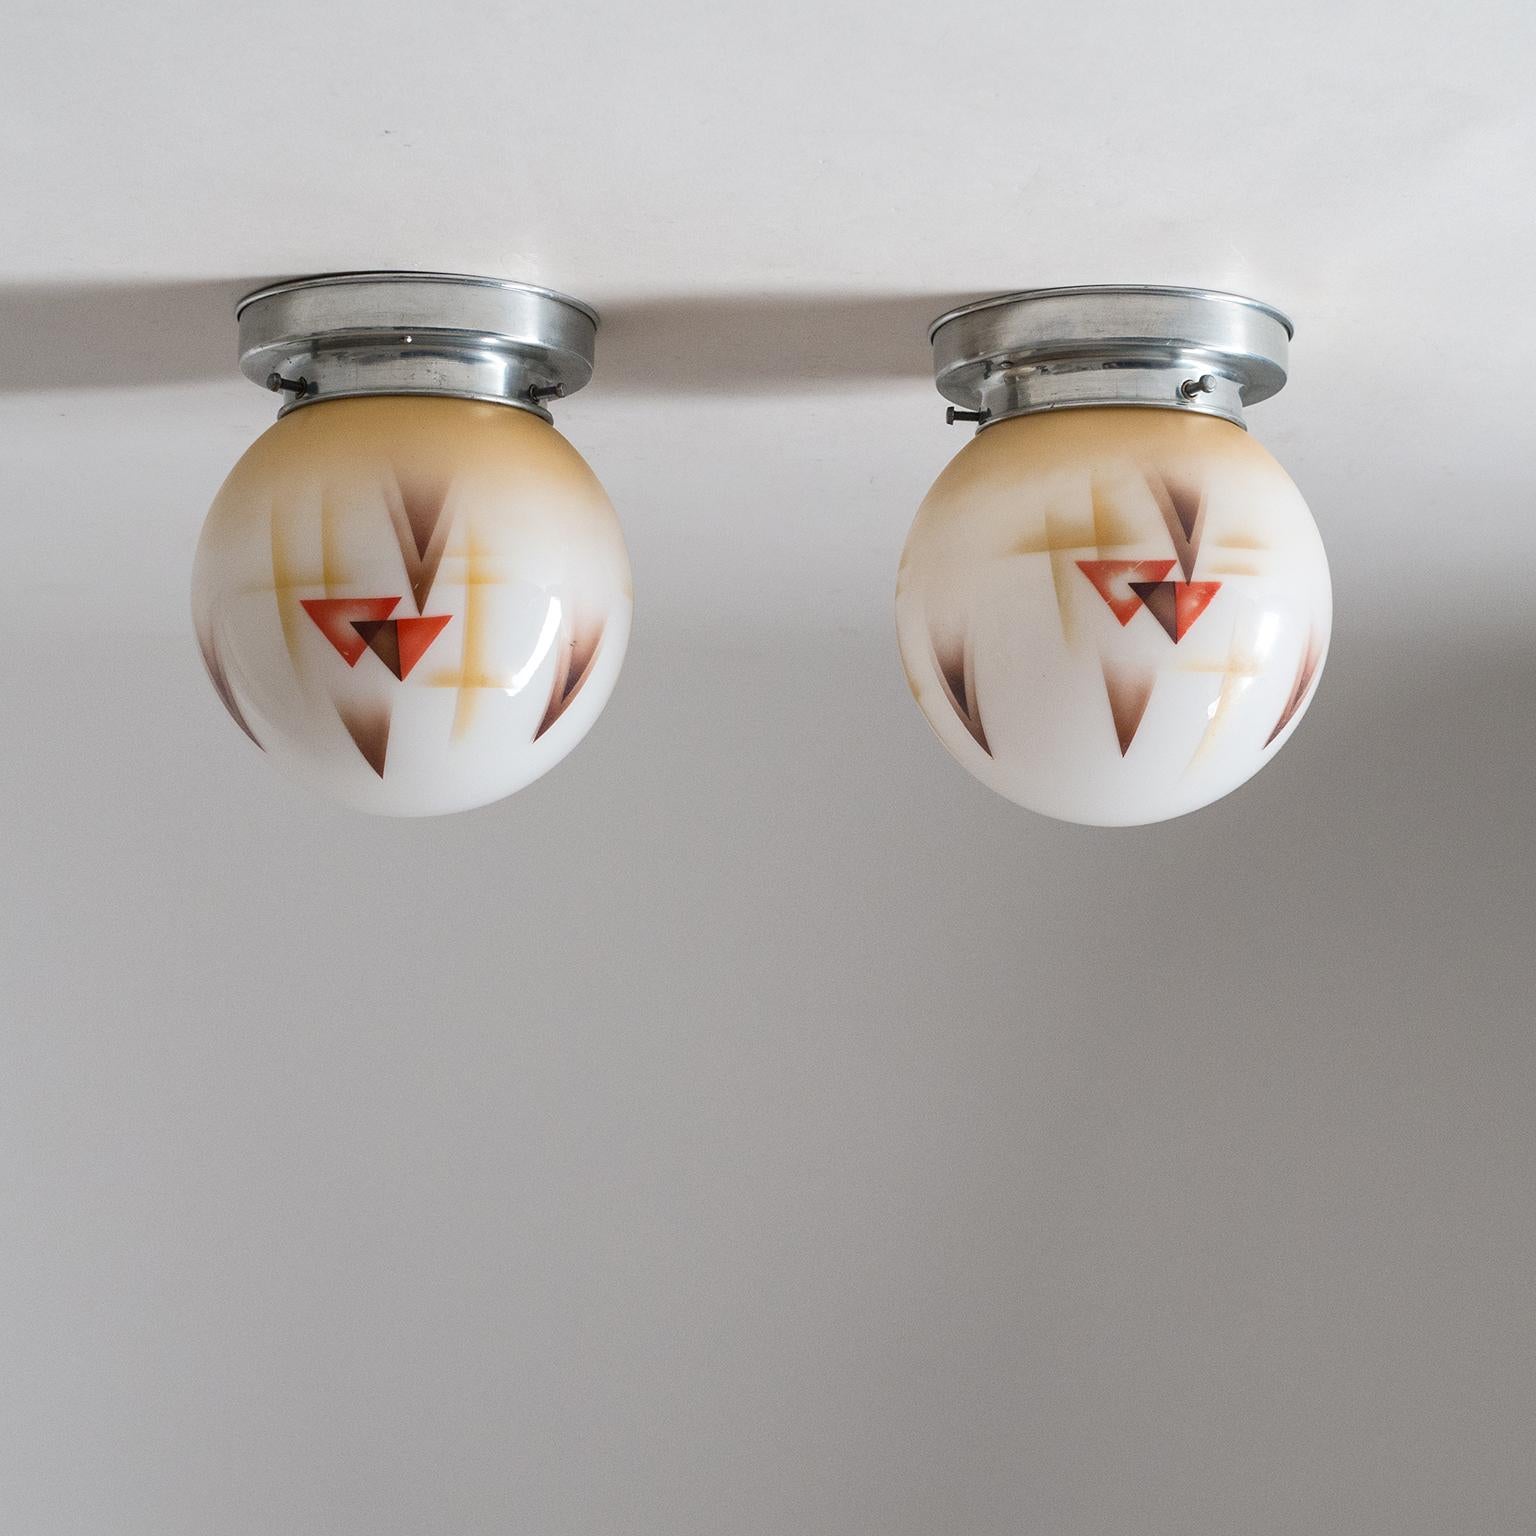 Pair of Art Deco Ceiling or Wall Lights, circa 1930, Enameled Glass 8